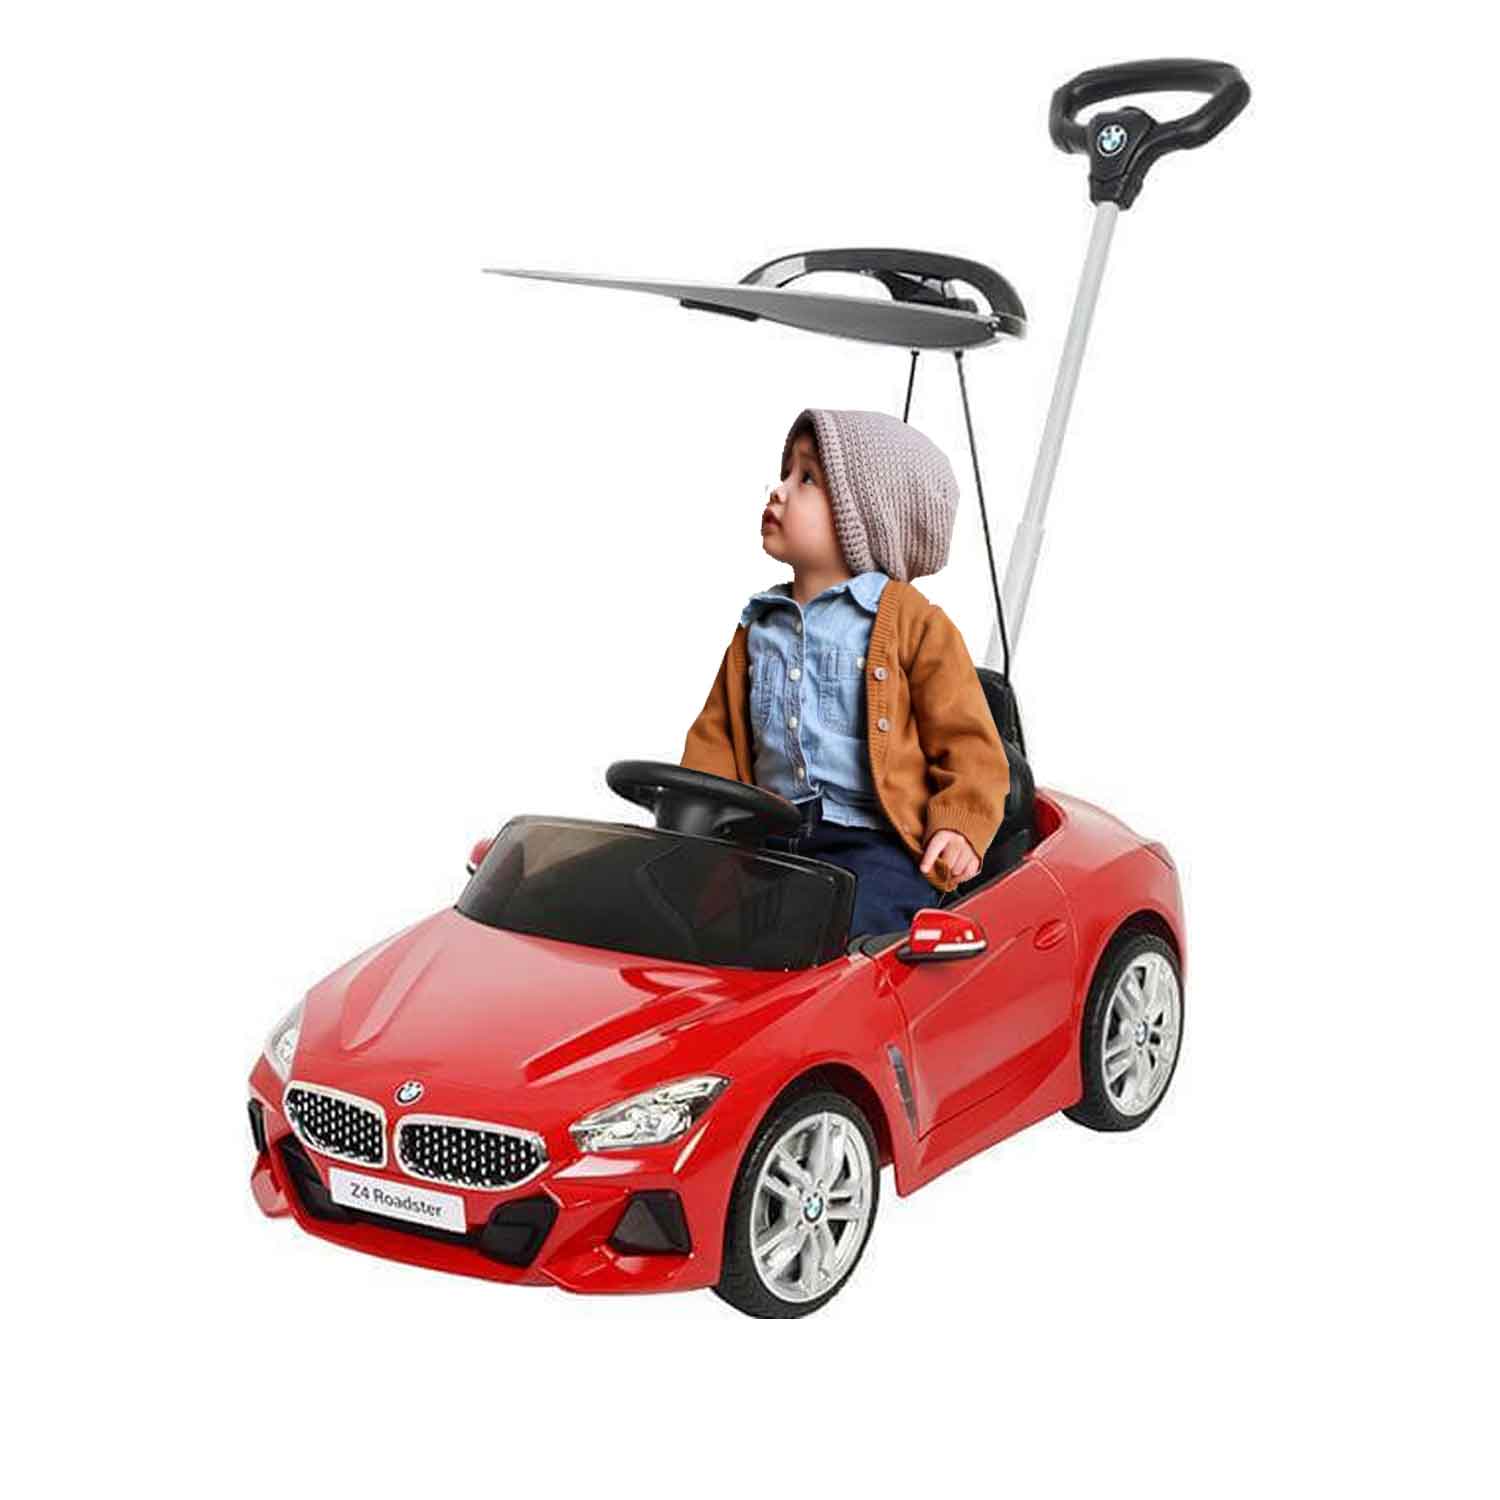 Megastar Ride on Push Car BMW Z4 For Kids with Canopy